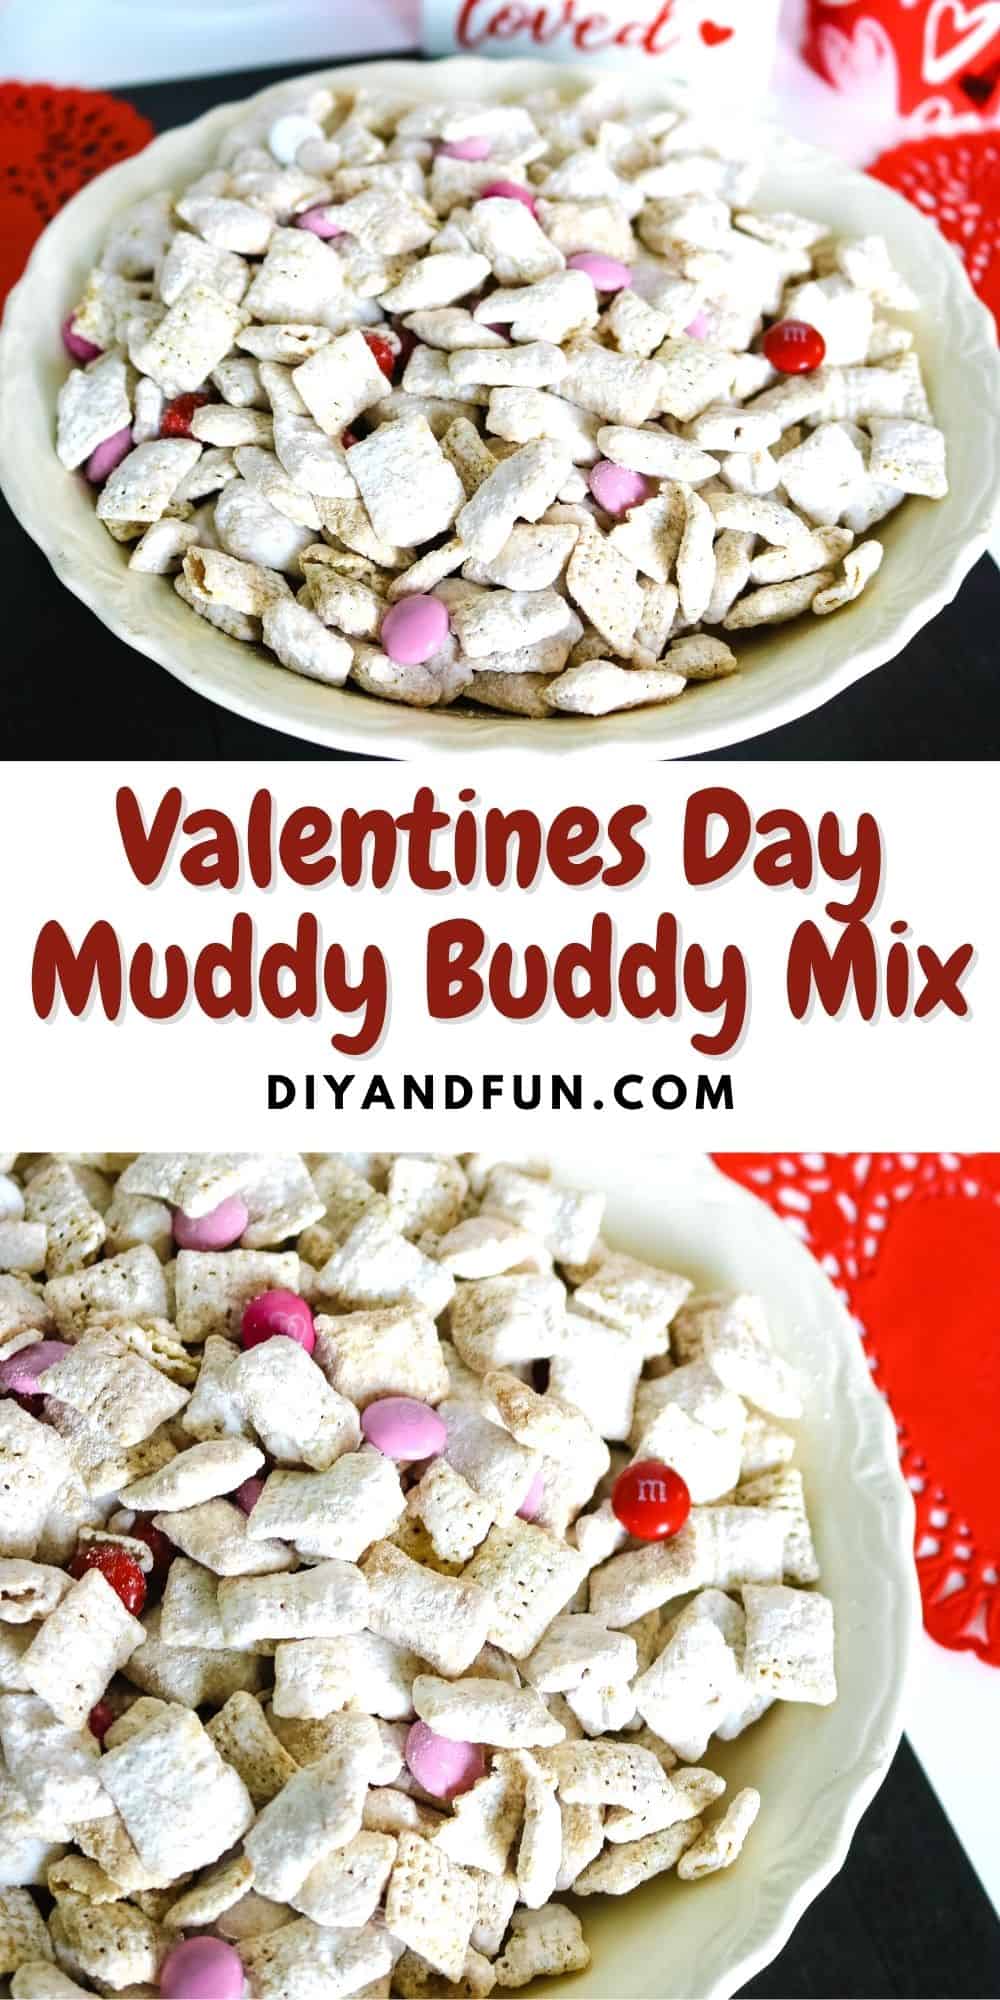 Valentines Day Muddy Buddy Mix, a cereal based puppy chow snack recipe that is especially for Valentines day.